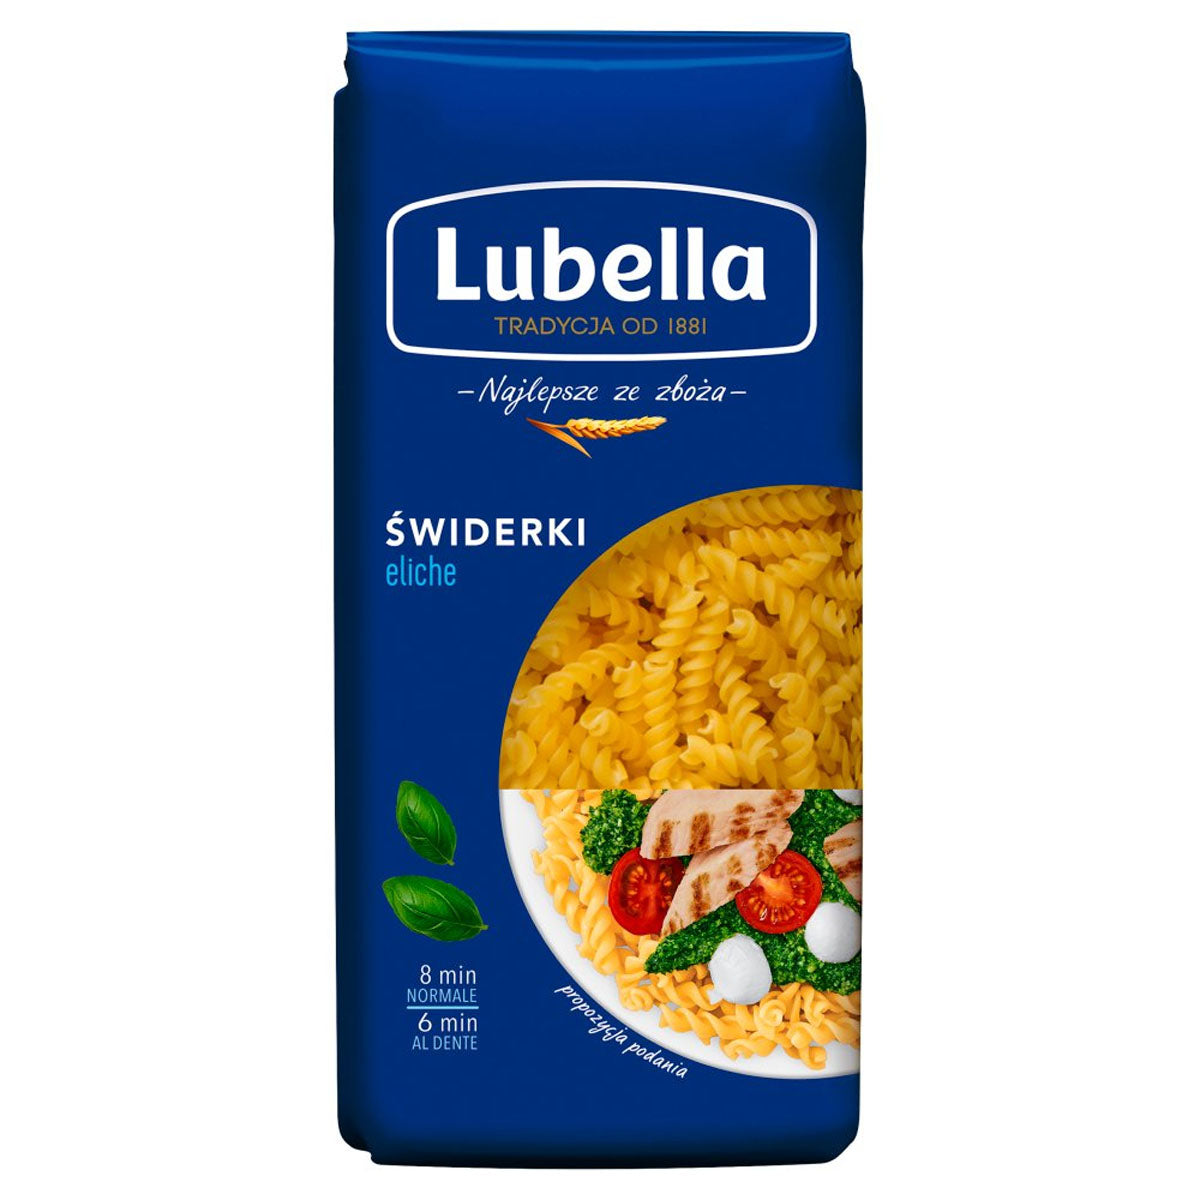 A bag of Lubella - Little Twists Makaron Pasta - 400g.